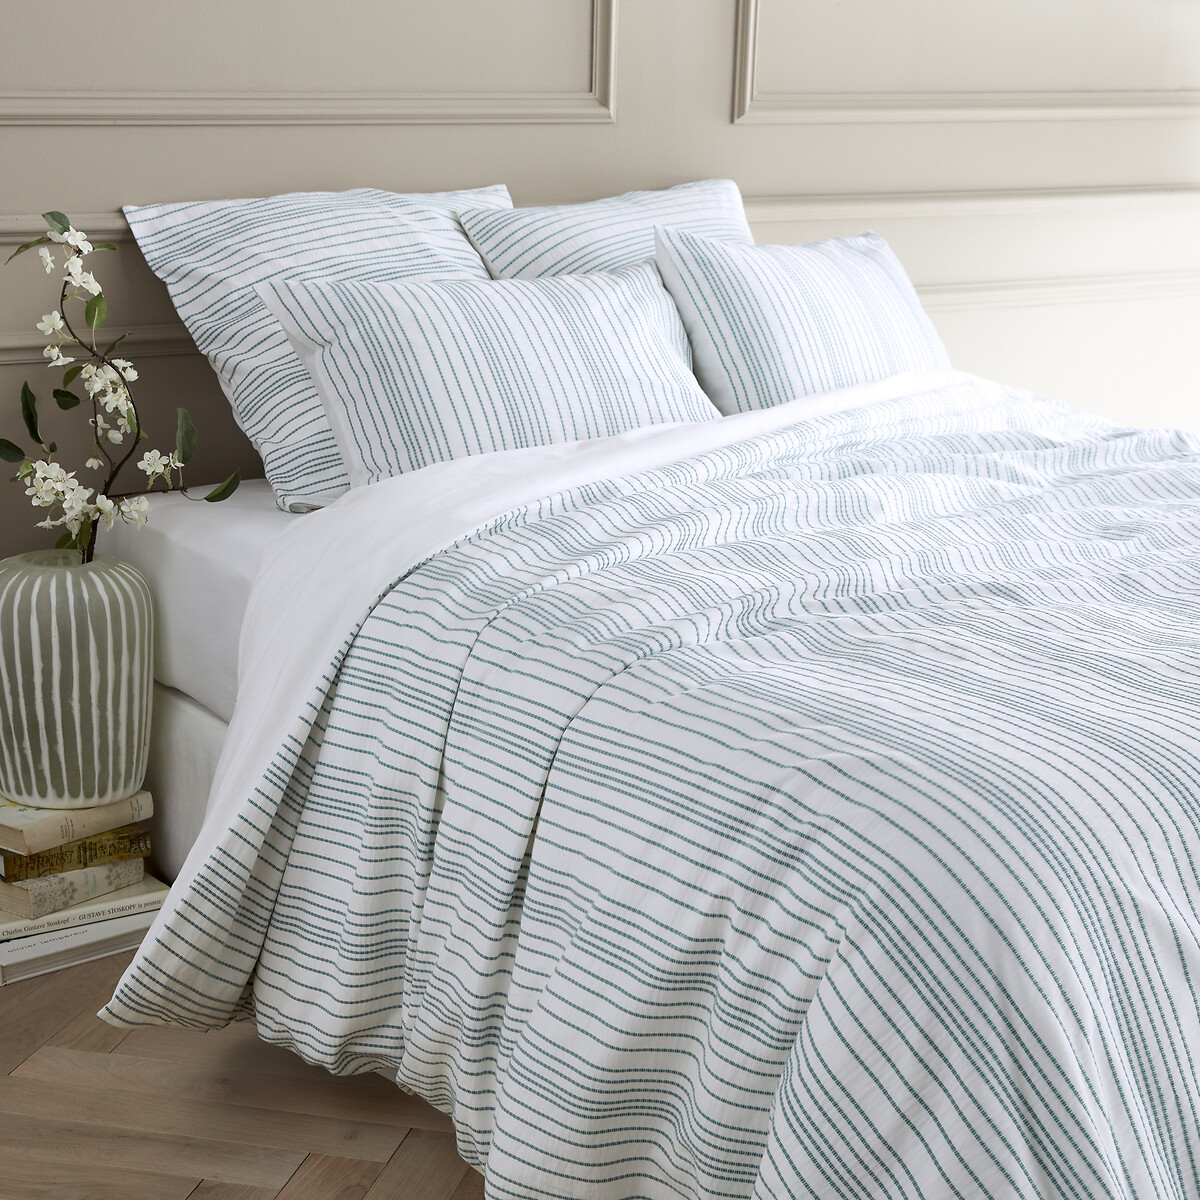 Roma Striped Embroidered 100% Washed Cotton Percale Duvet Cover